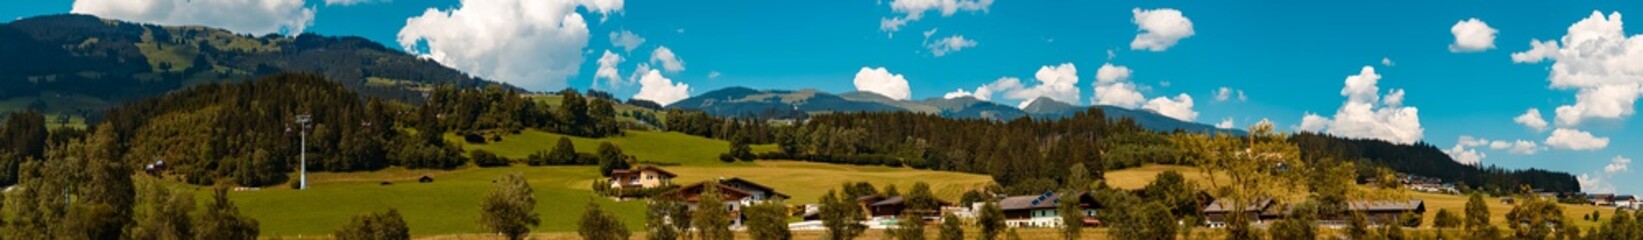 High resolution stitched panorama of a beautiful alpine summer view at the famous Panoramabahn...